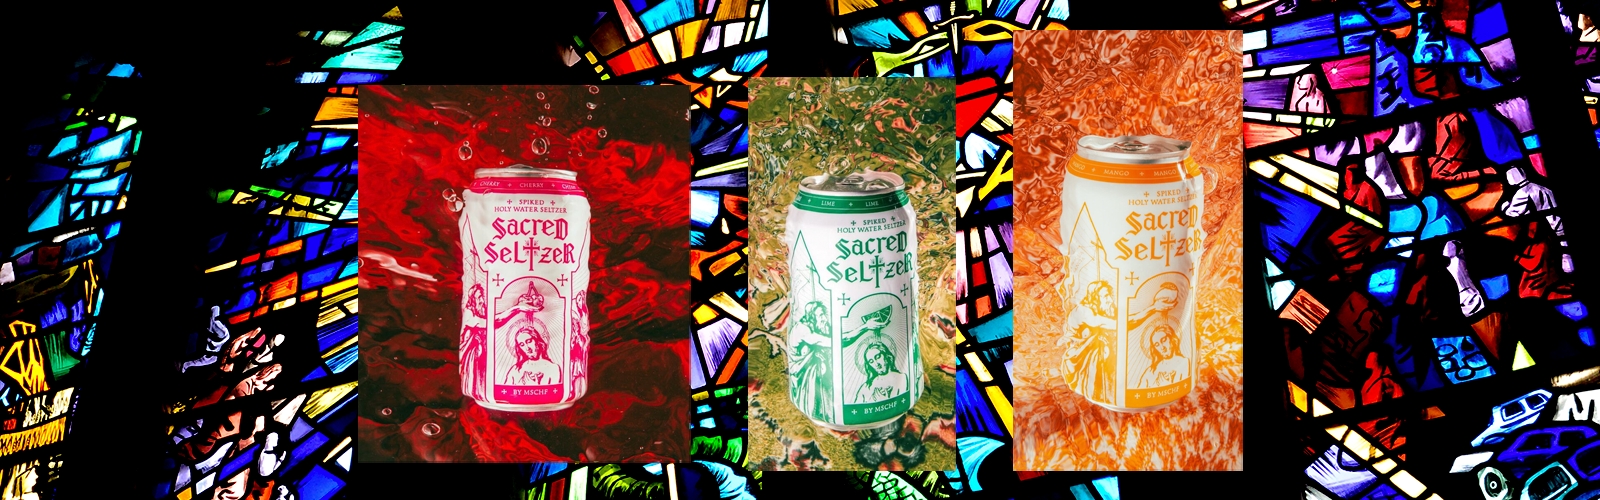 We Tried MSCHF'S Holy Water Hard Seltzer, Sacred Seltzer